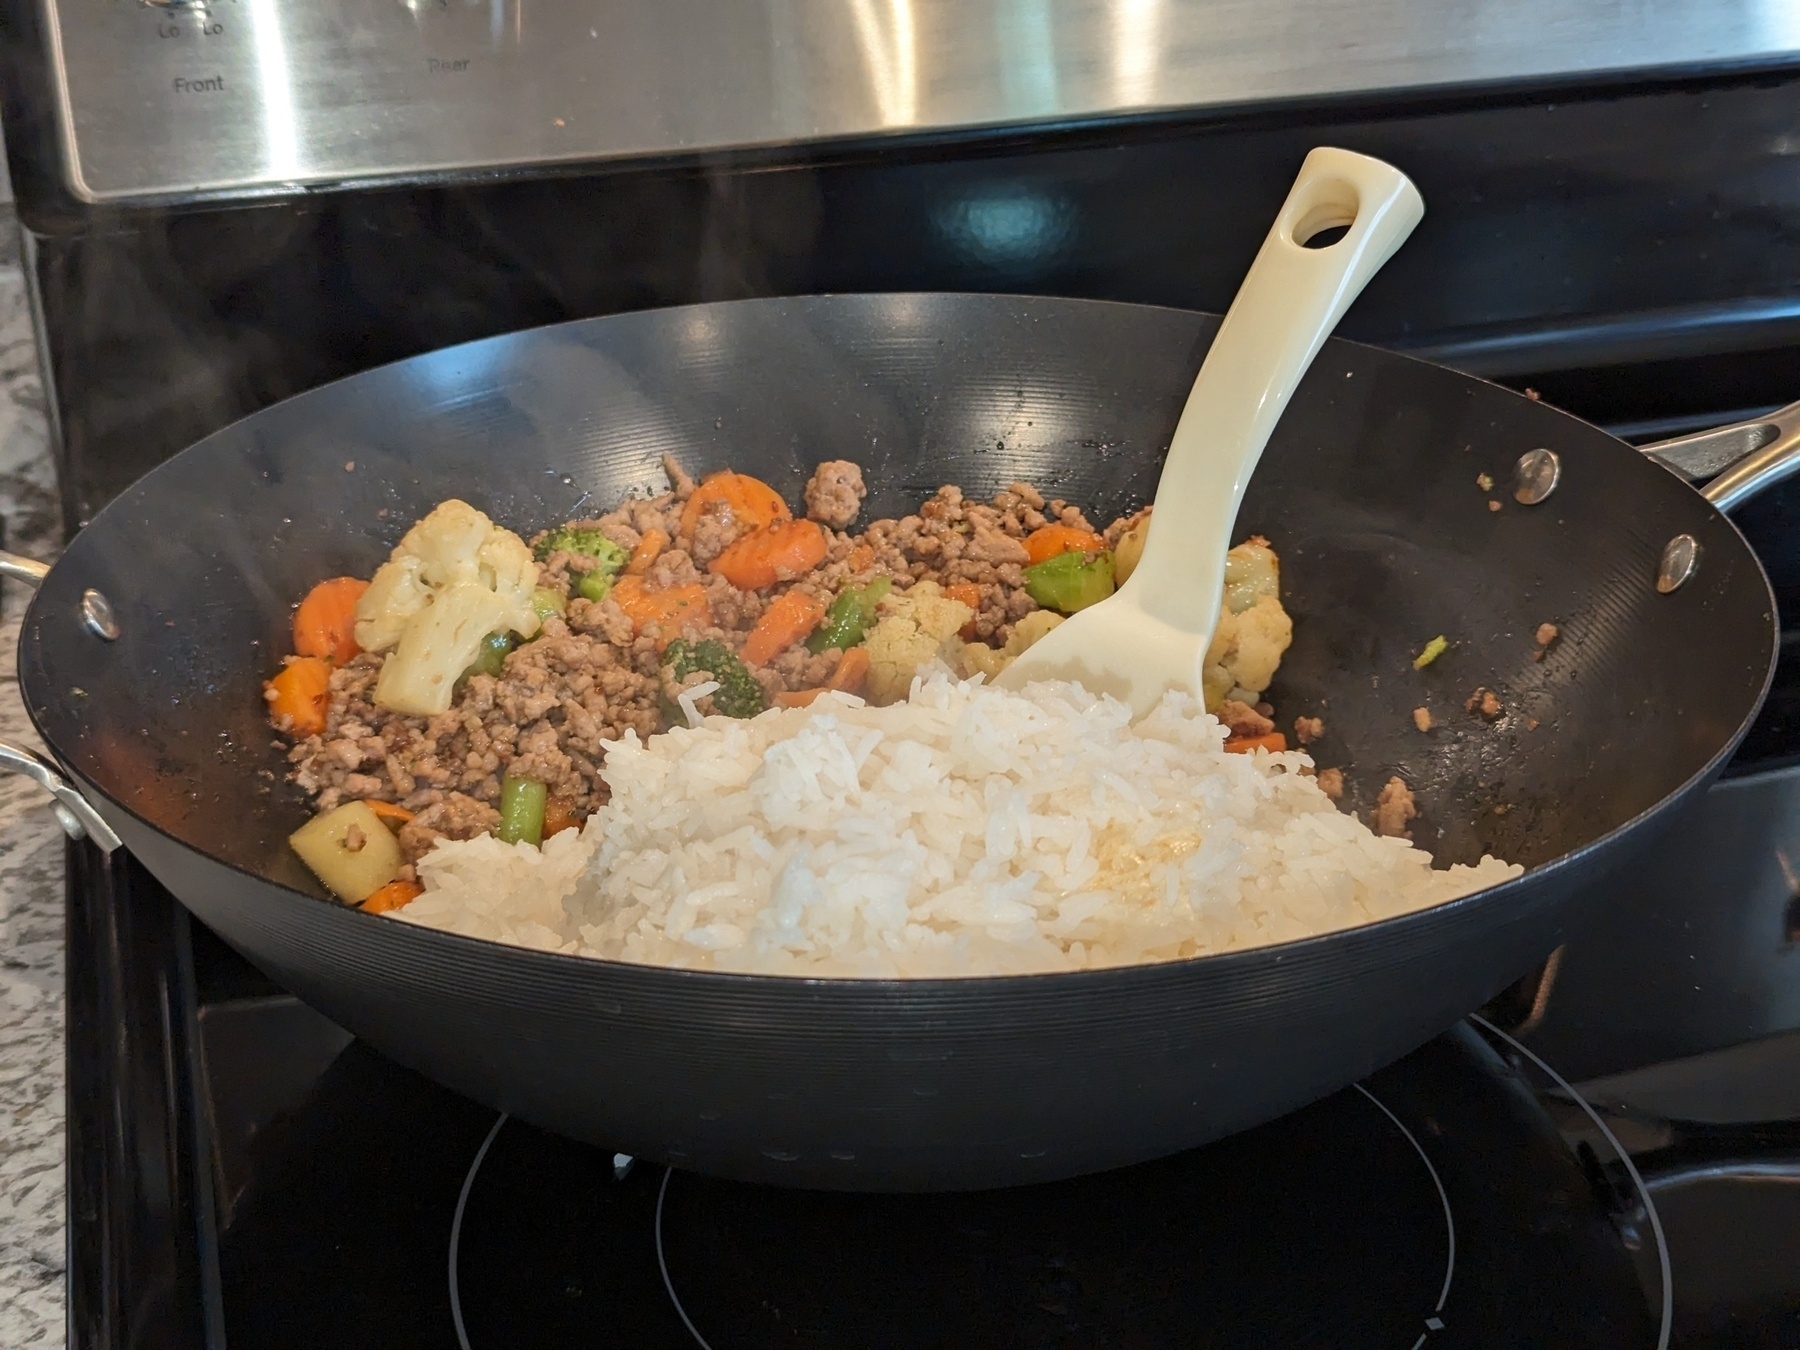 White rice, pork, and mixed vegetables in a wok.